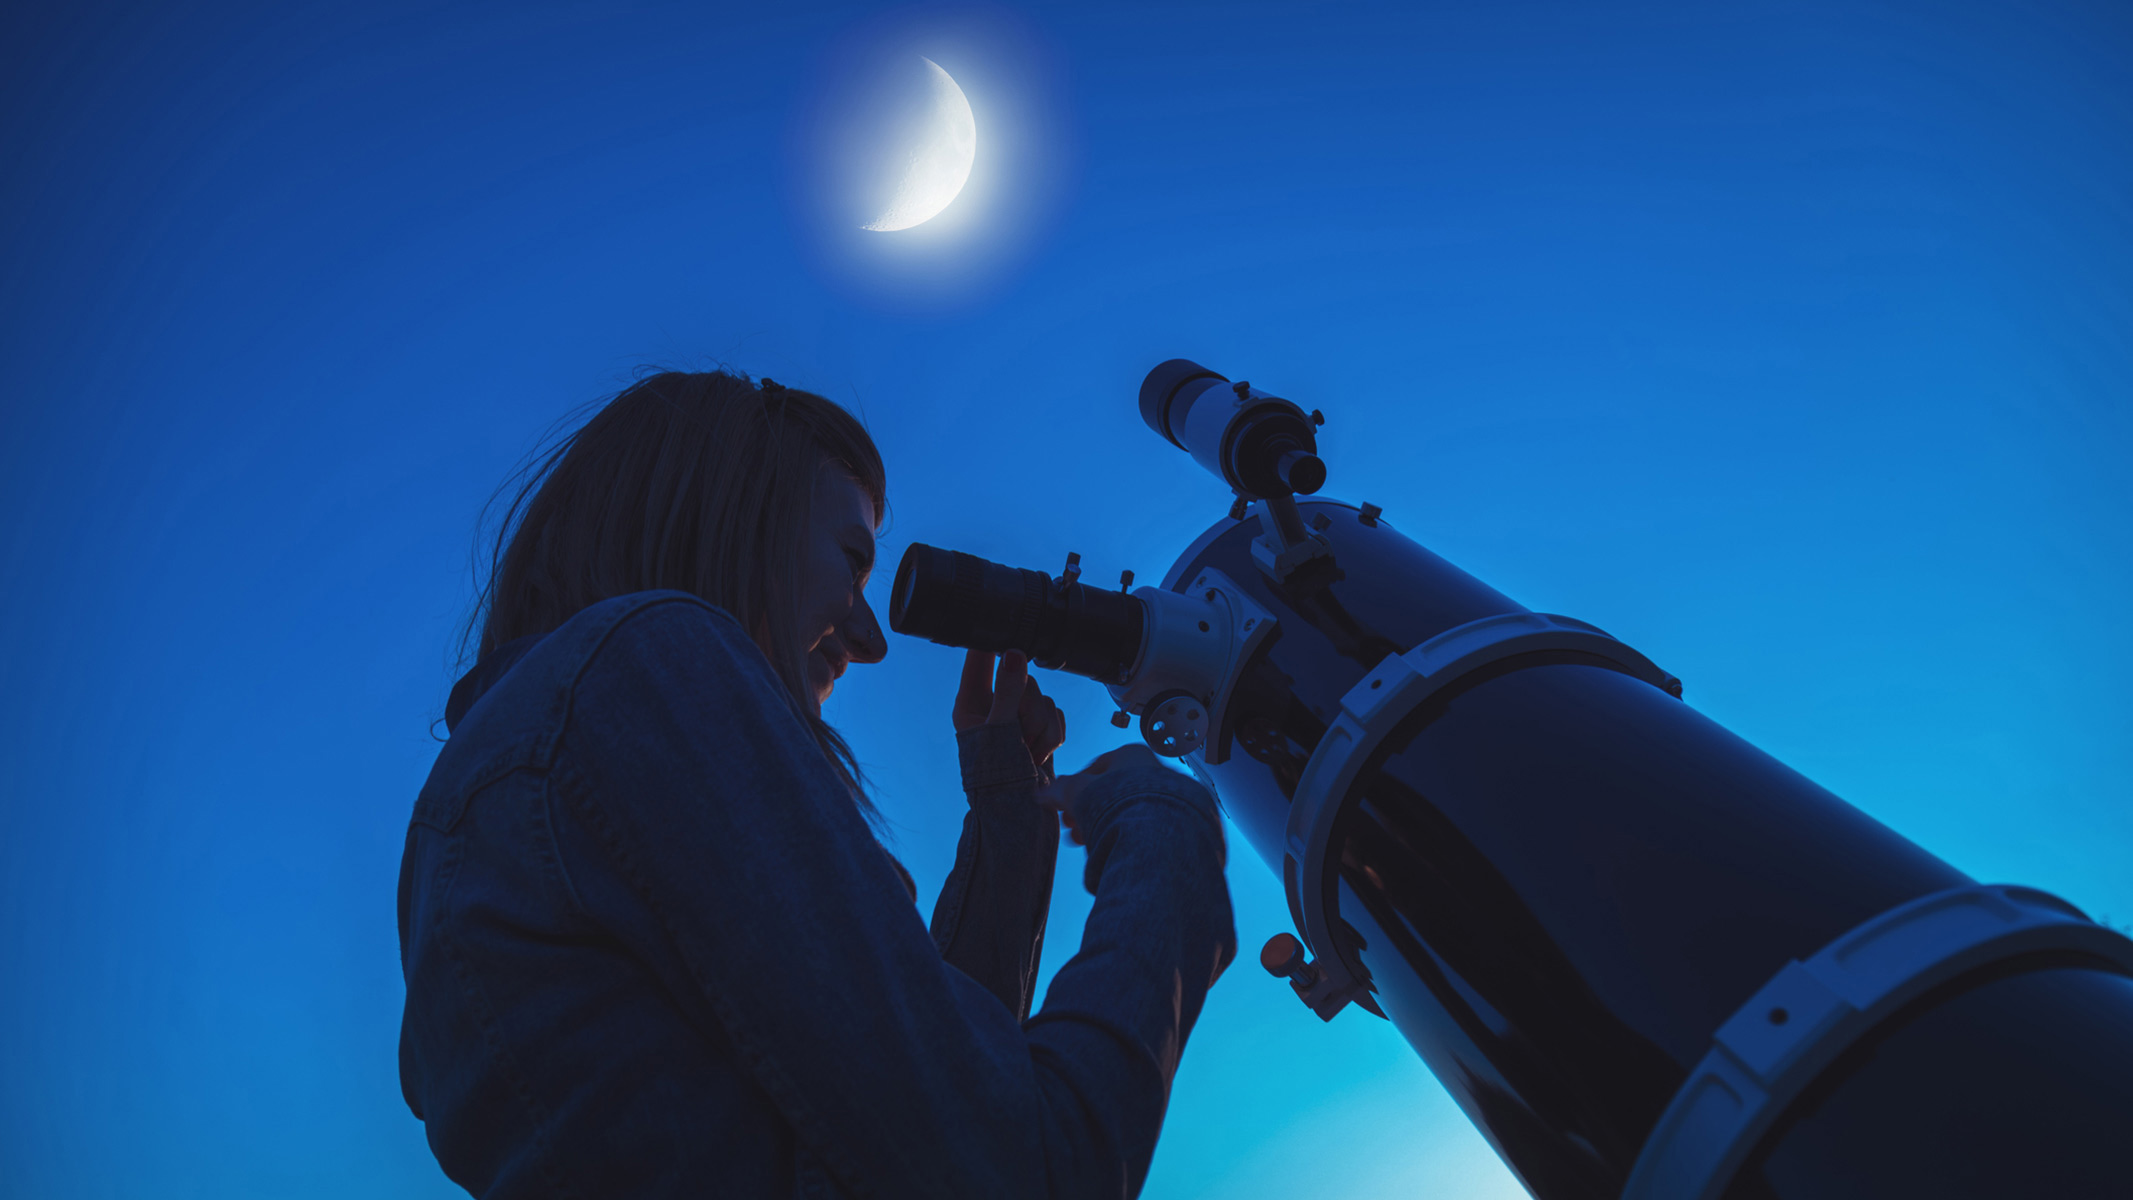 Star Gazing Telescope Review: A Must-Have for Astronomy Enthusiasts